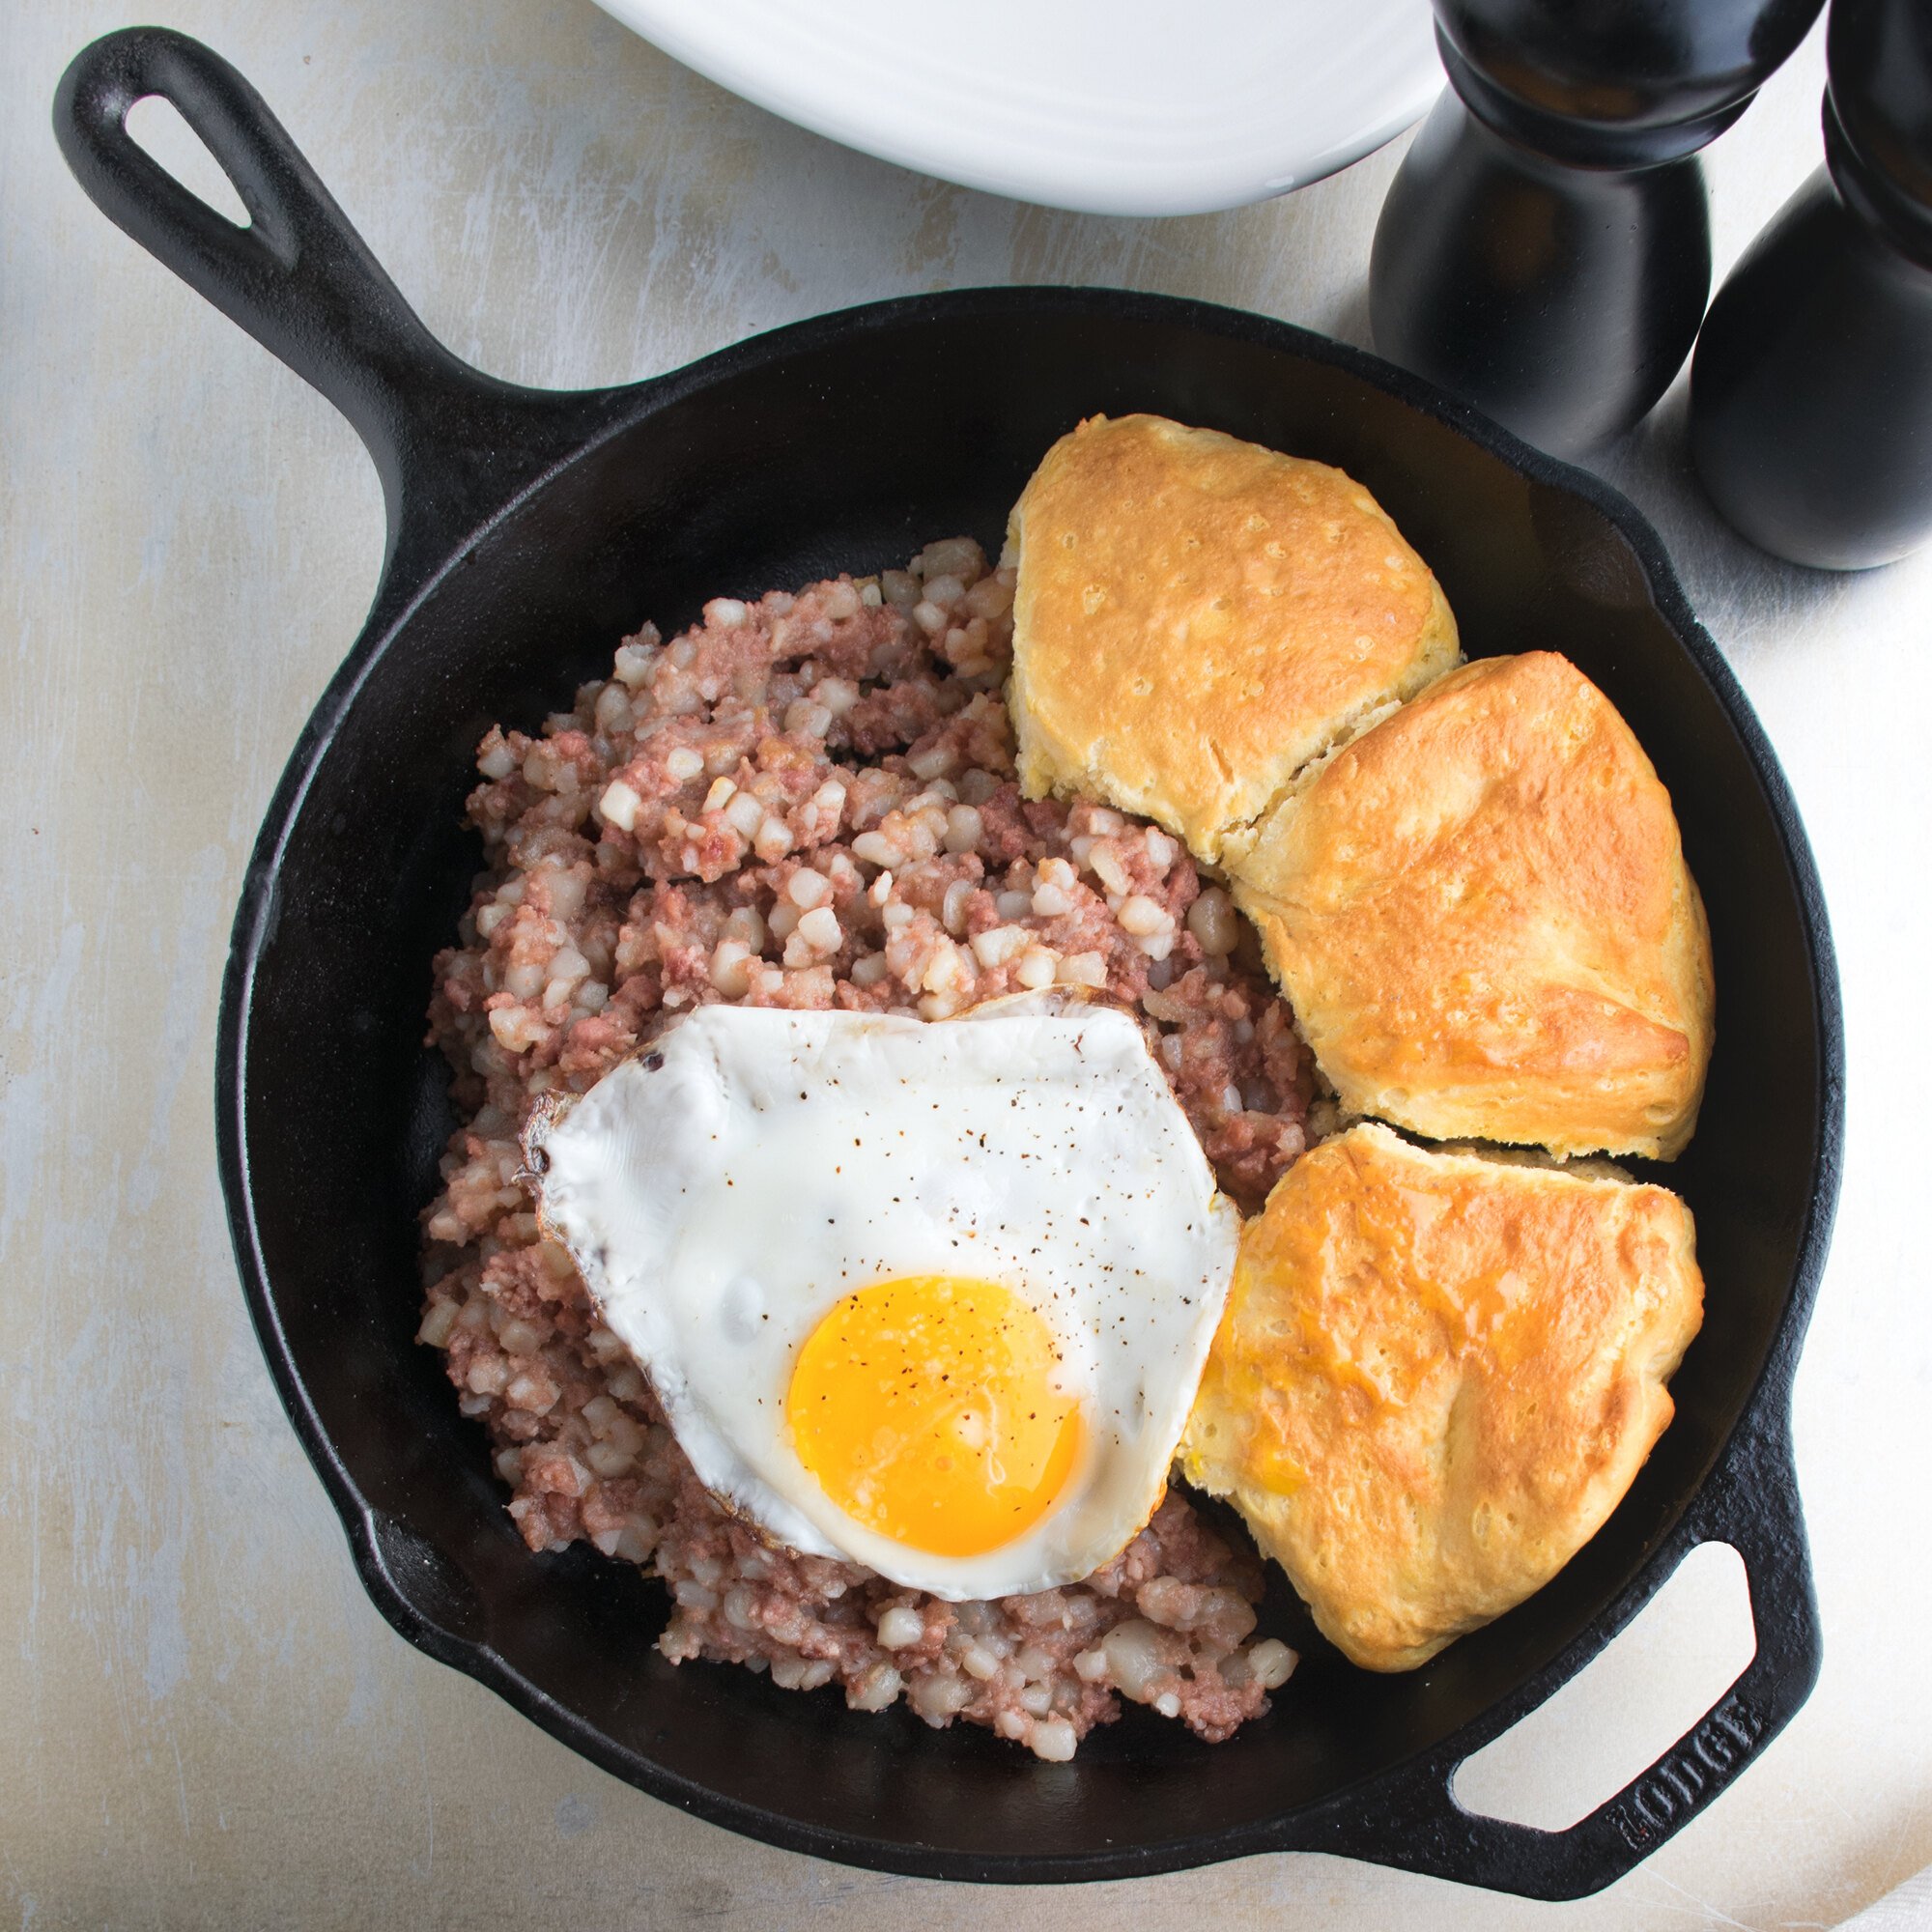 canned corned beef hash